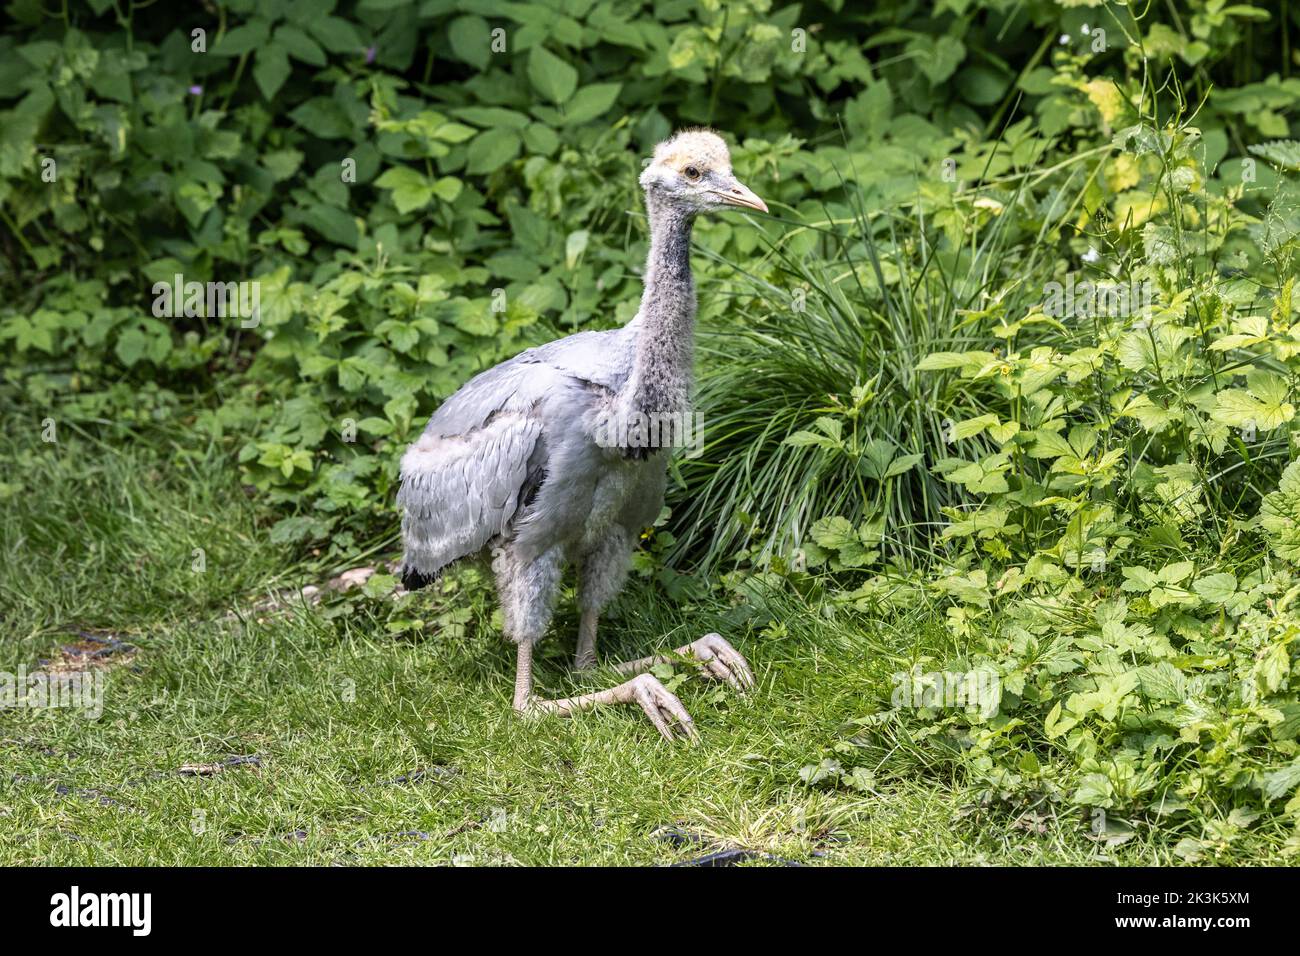 Beautiful yellow fluffy Demoiselle Crane baby gosling, Anthropoides virgo are living in the bright green meadow during the day time. It is a species o Stock Photo